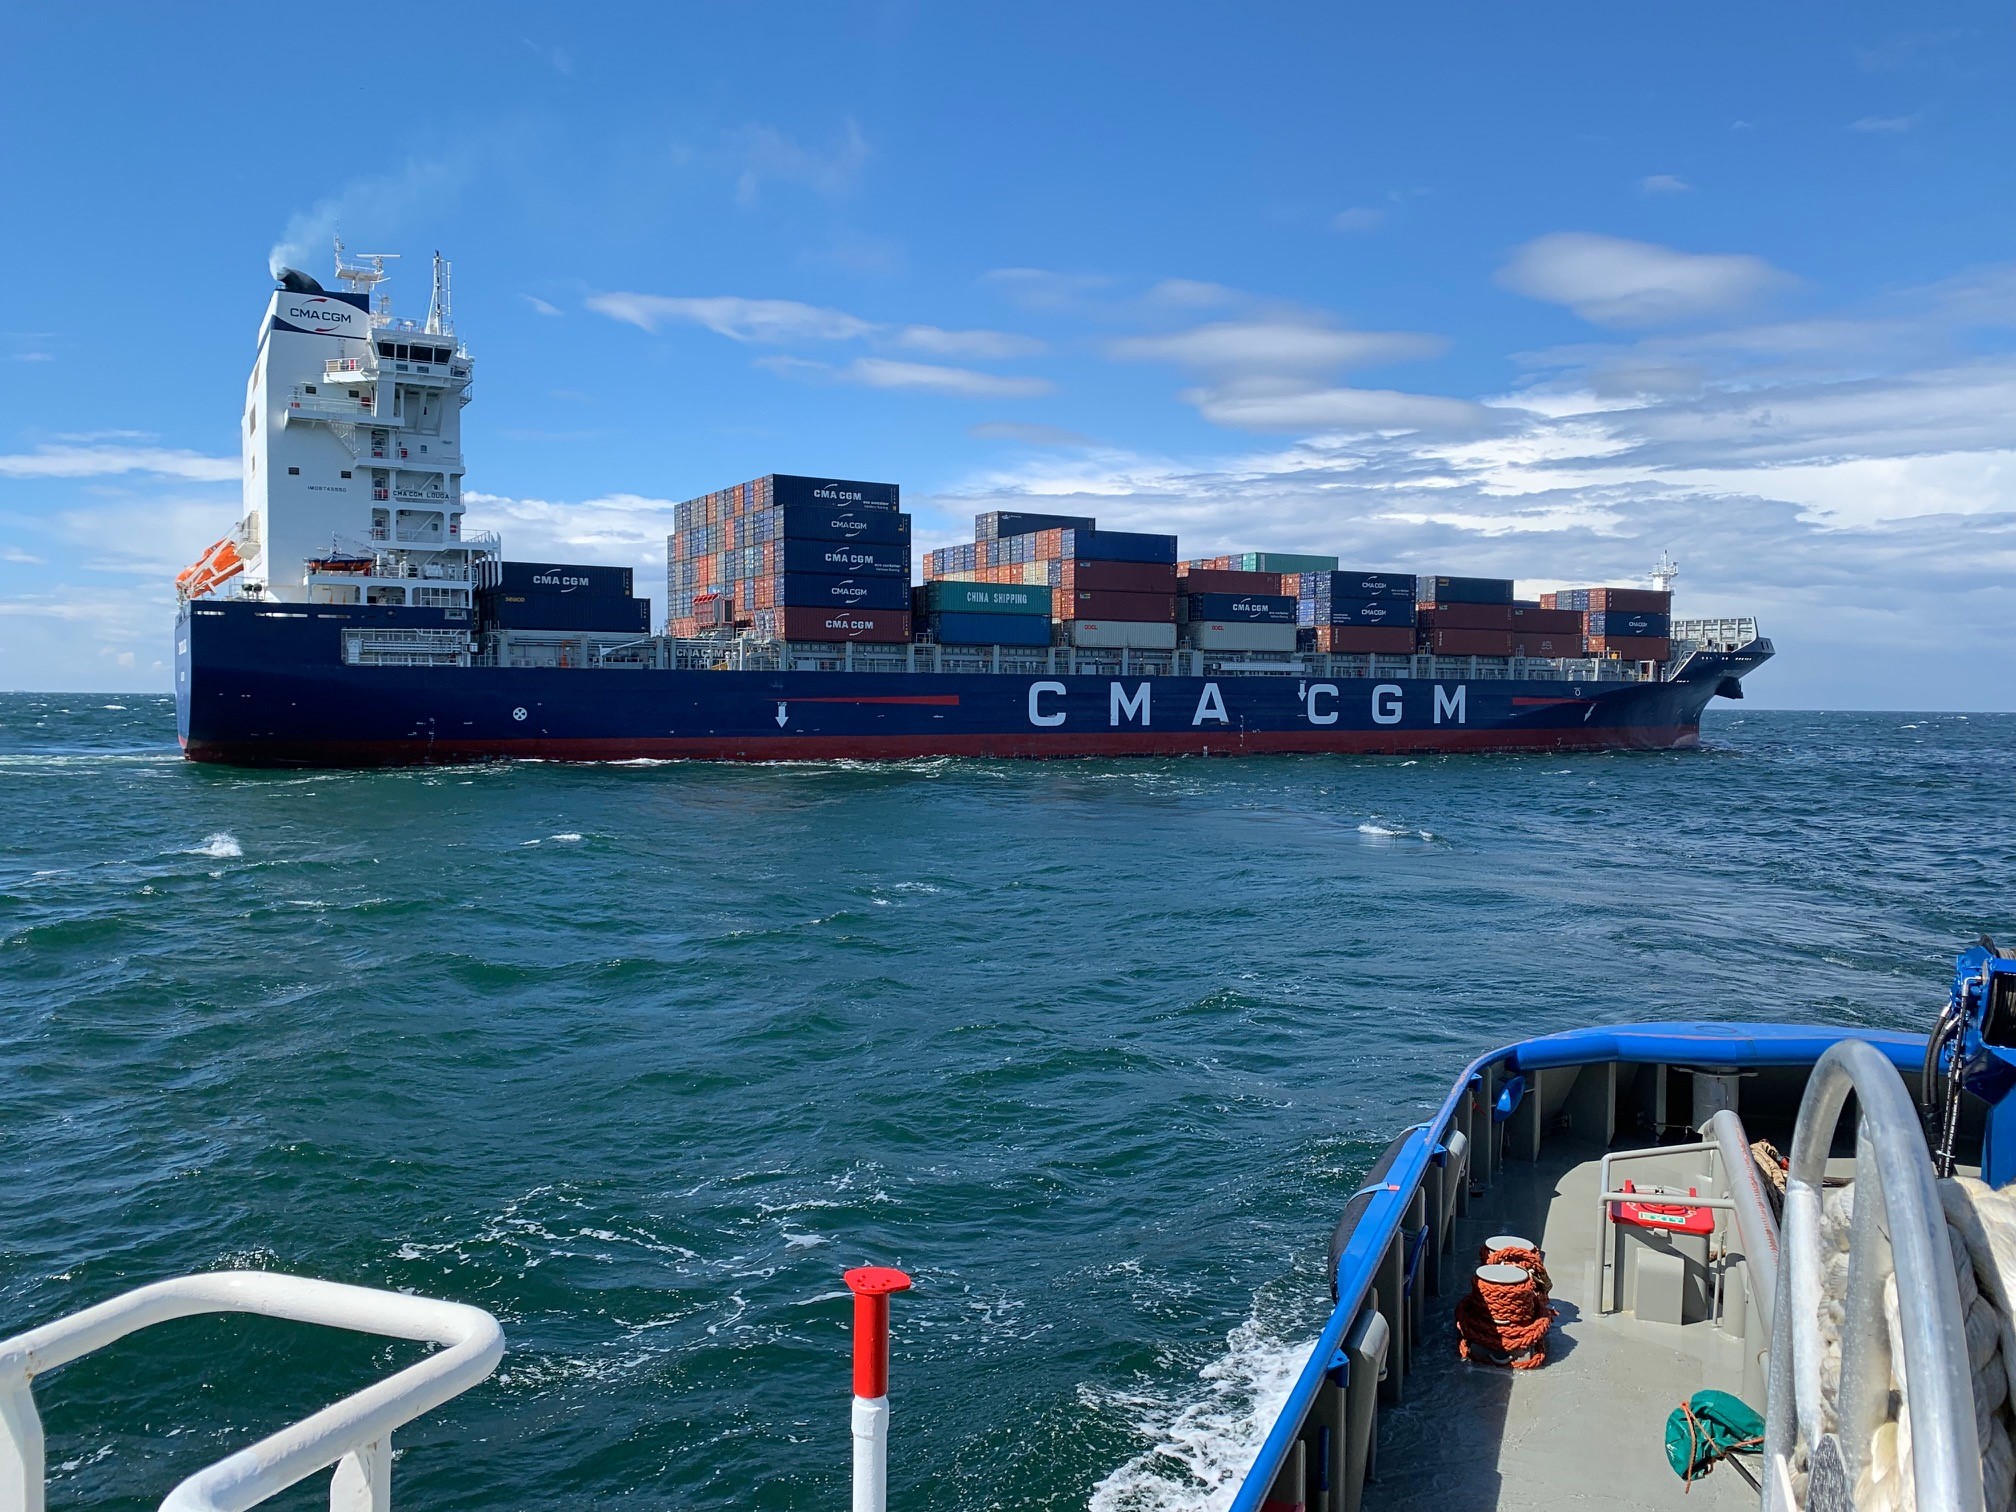 CMA CGM to reorganize its SIRIUS service connecting the Mediterranean with the East Coast of South America